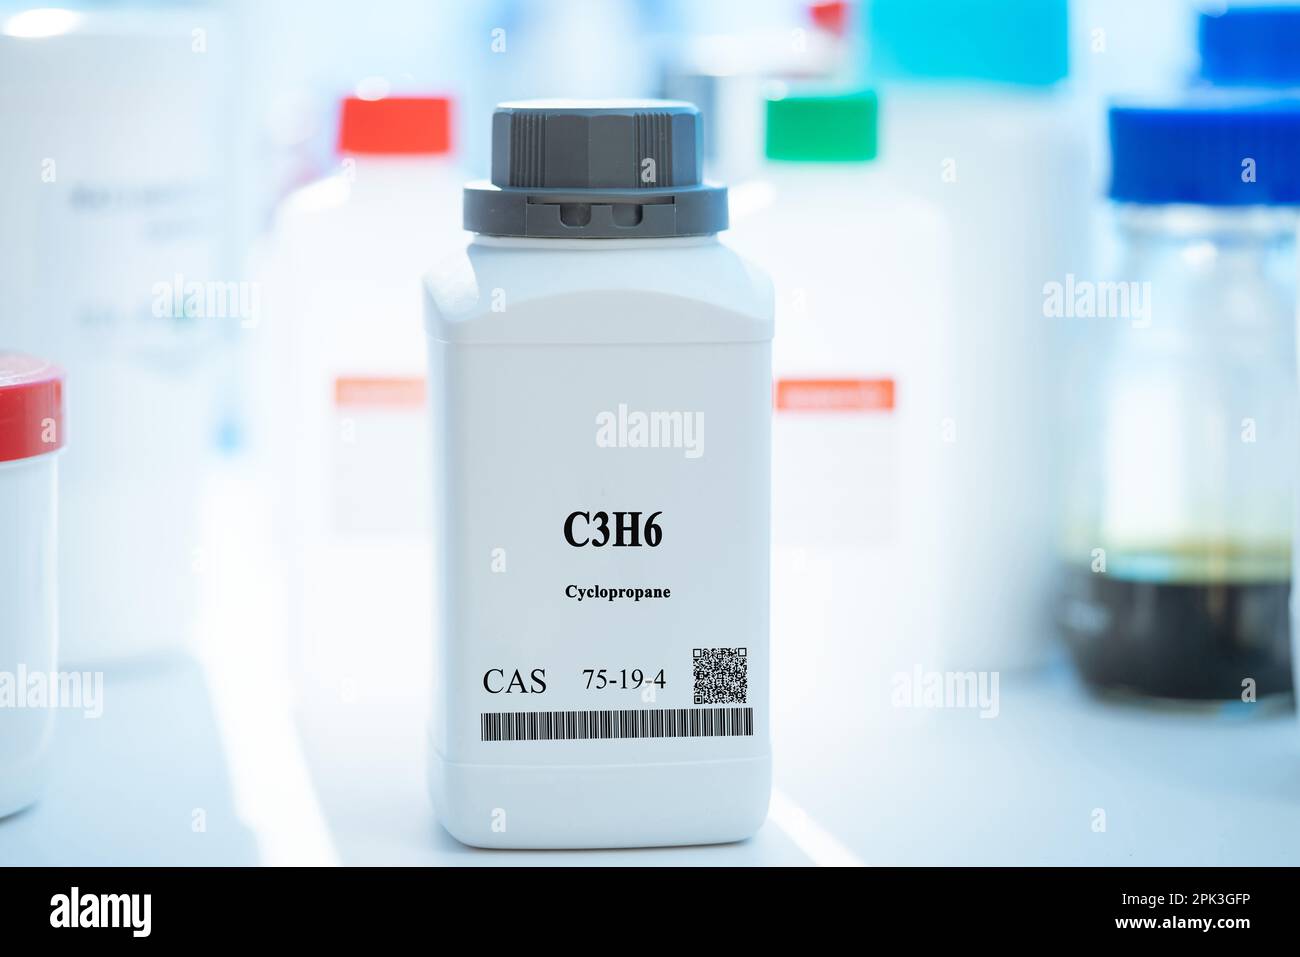 C3H6 cyclopropane CAS 75-19-4 chemical substance in white plastic ...